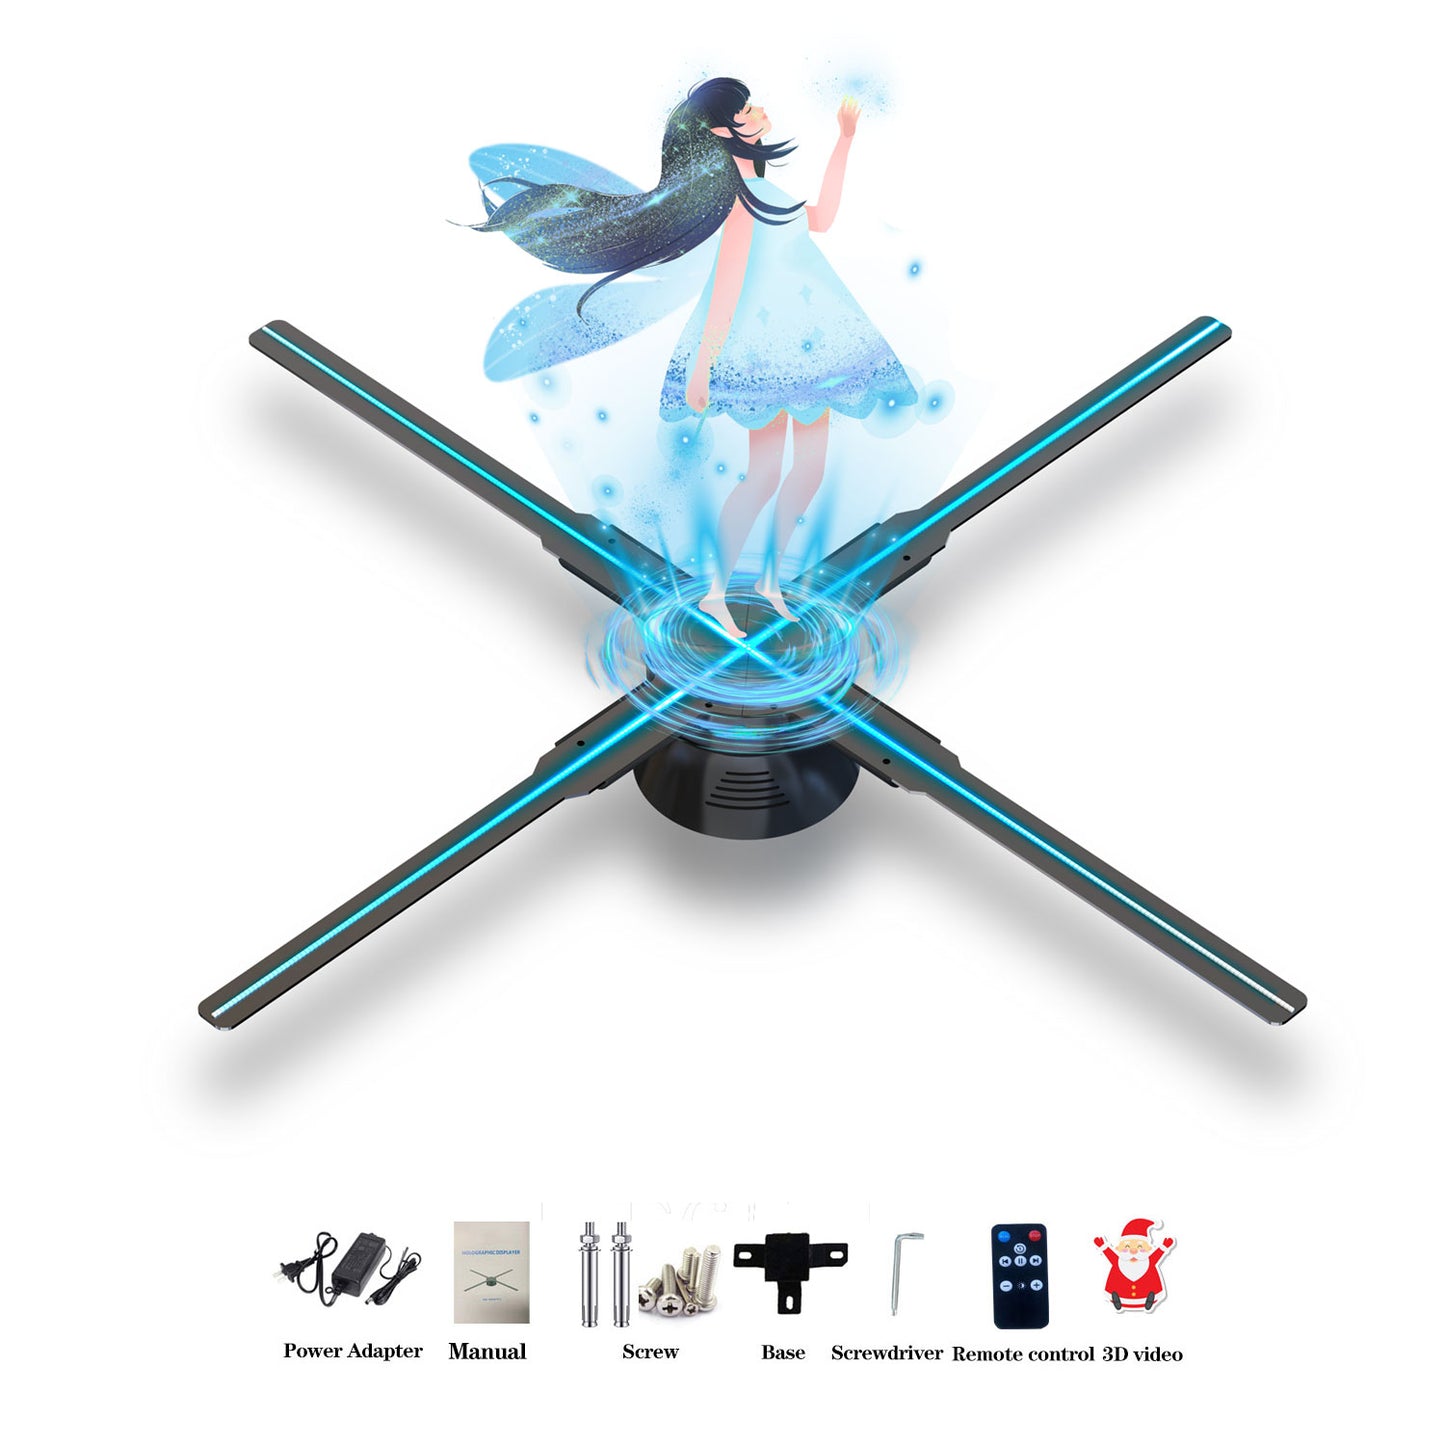 3D Hologram Fan Display with WiFi, Four-Axil Spinning, and High Transfer Speed, Upload by iPhone or Android，33.5 inch 3D Holographic Fan Projector for Shop, Bar